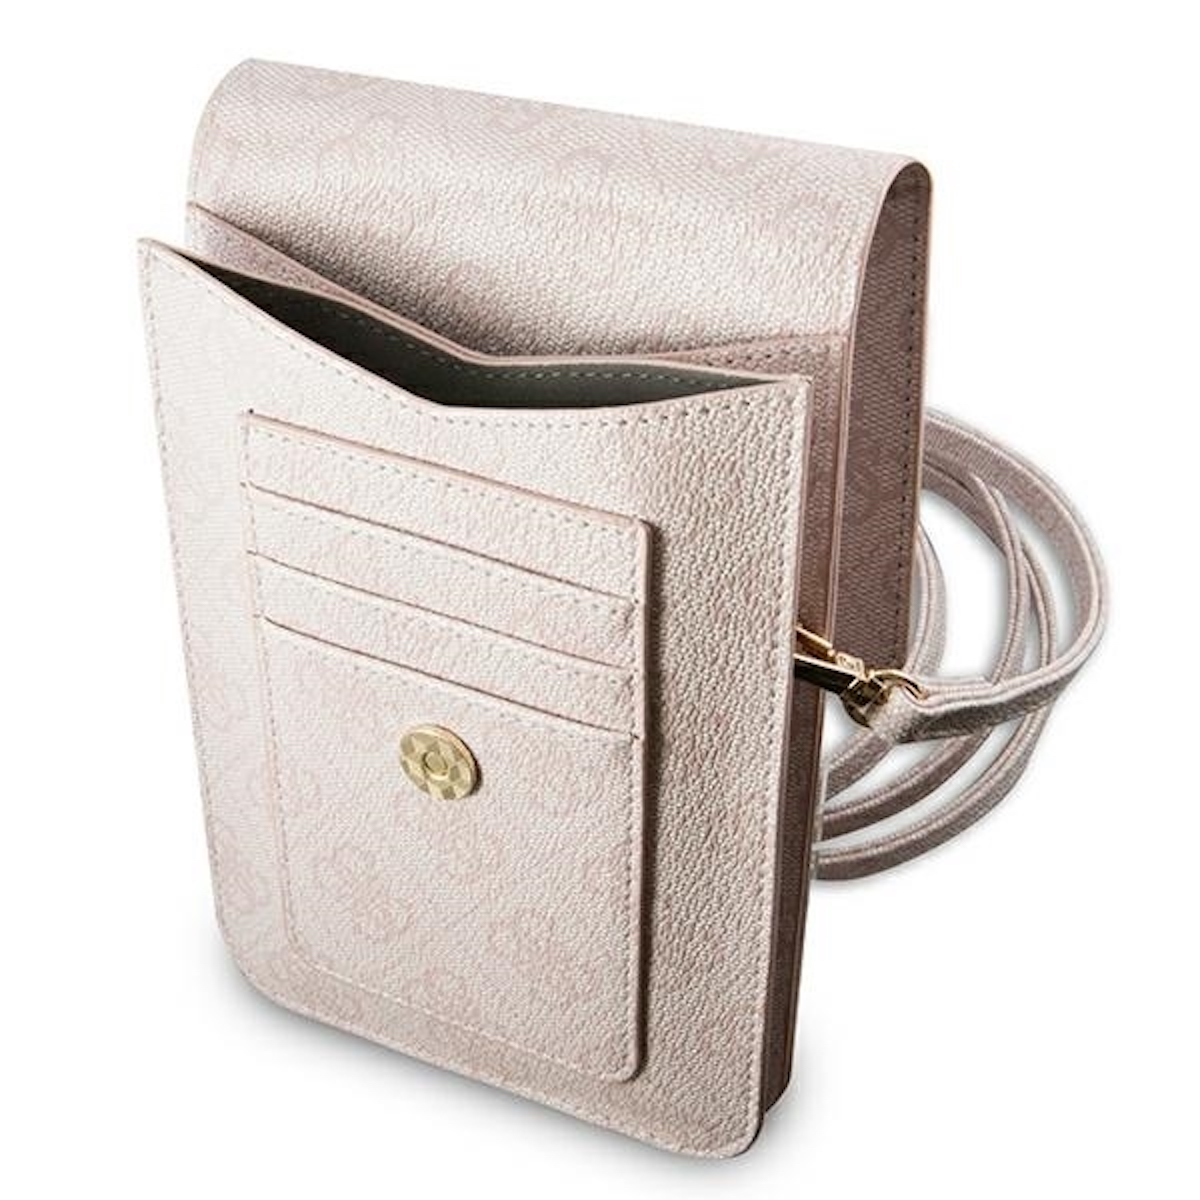 GUESS Torebka Big Logo Rosa Universelle Full Triangle Universell, Tasche, Cover, Umhängetasche